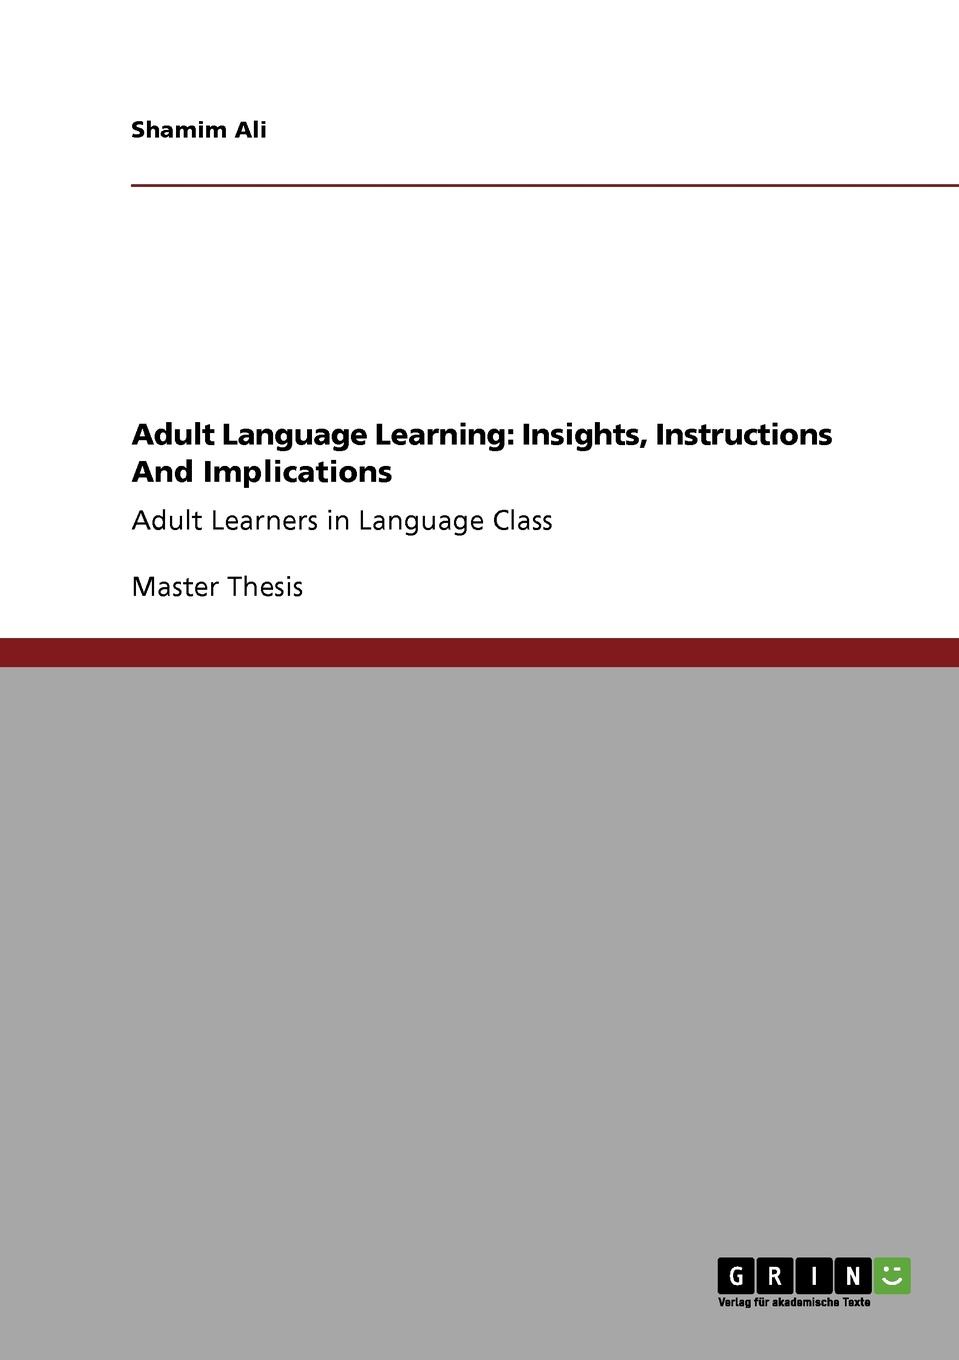 Adult Language Learning. Insights, Instructions And Implications